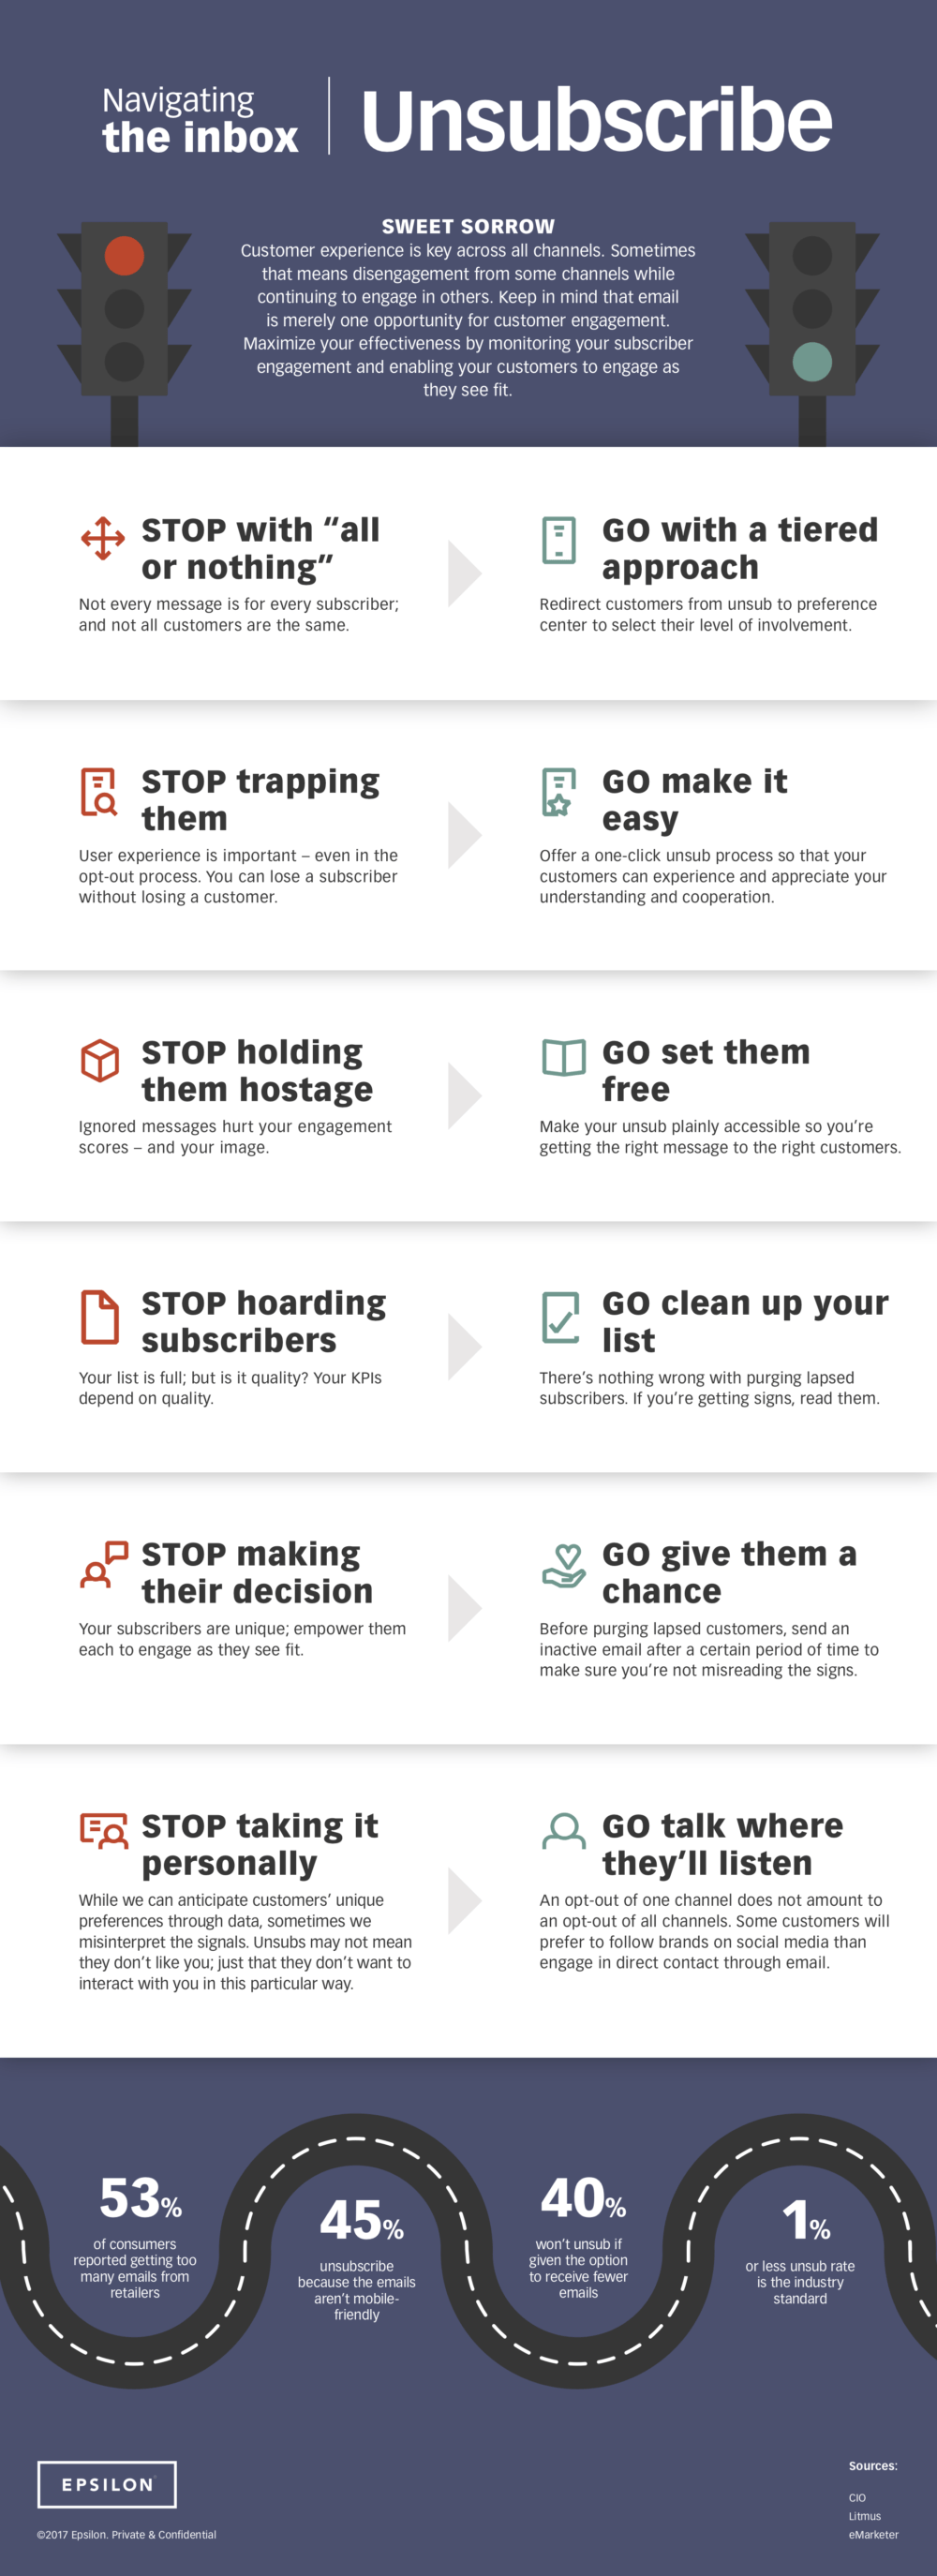 Navigating the inbox: Knowing when to say goodbye - #infographic